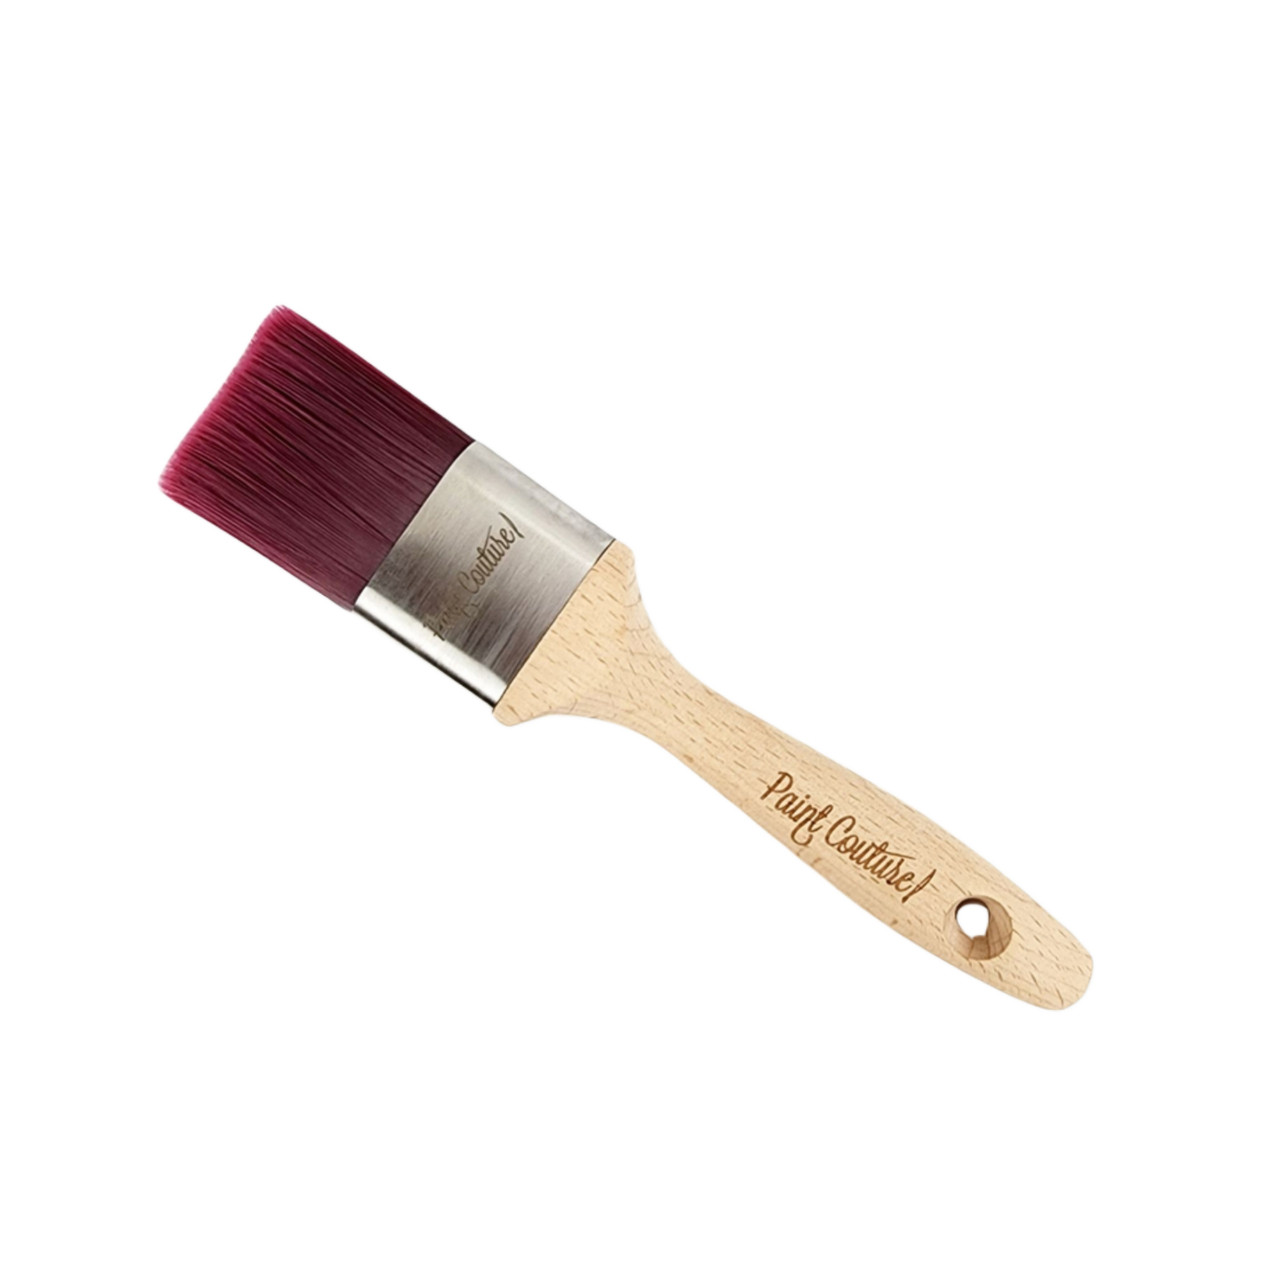 2 Flat Paint Couture Synthetic Paint Brush